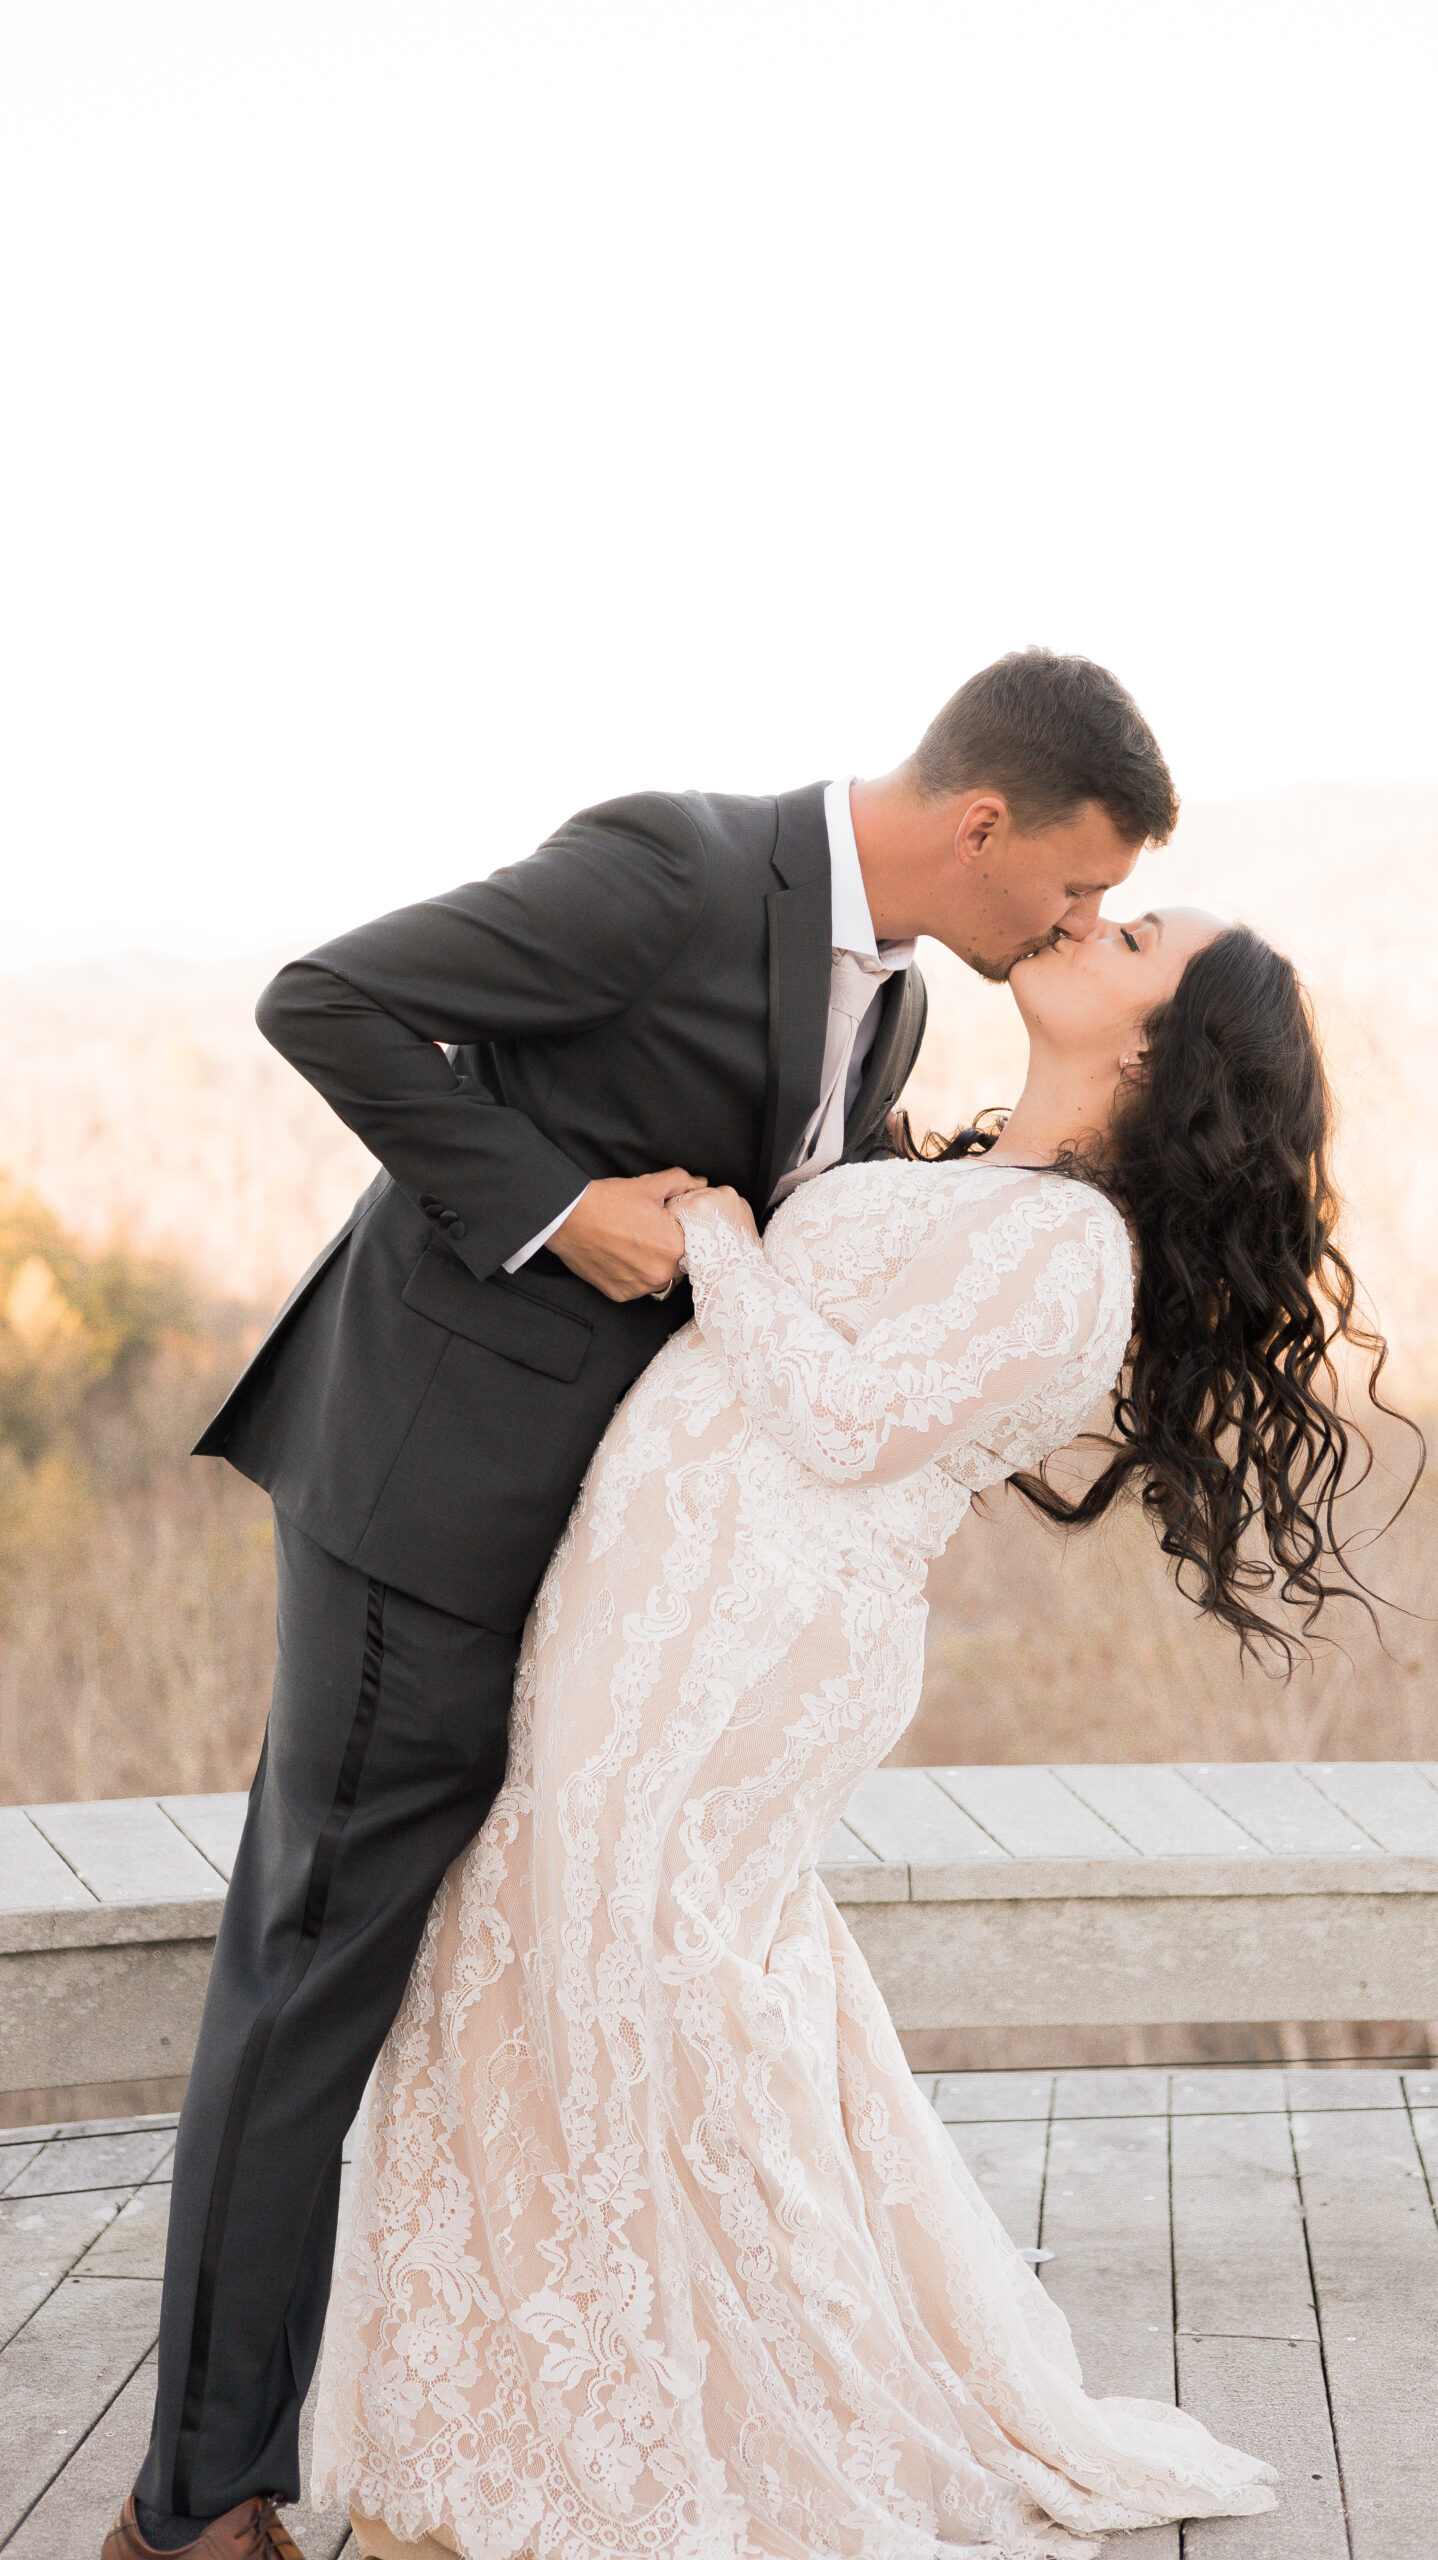 Elopement pricing and packages